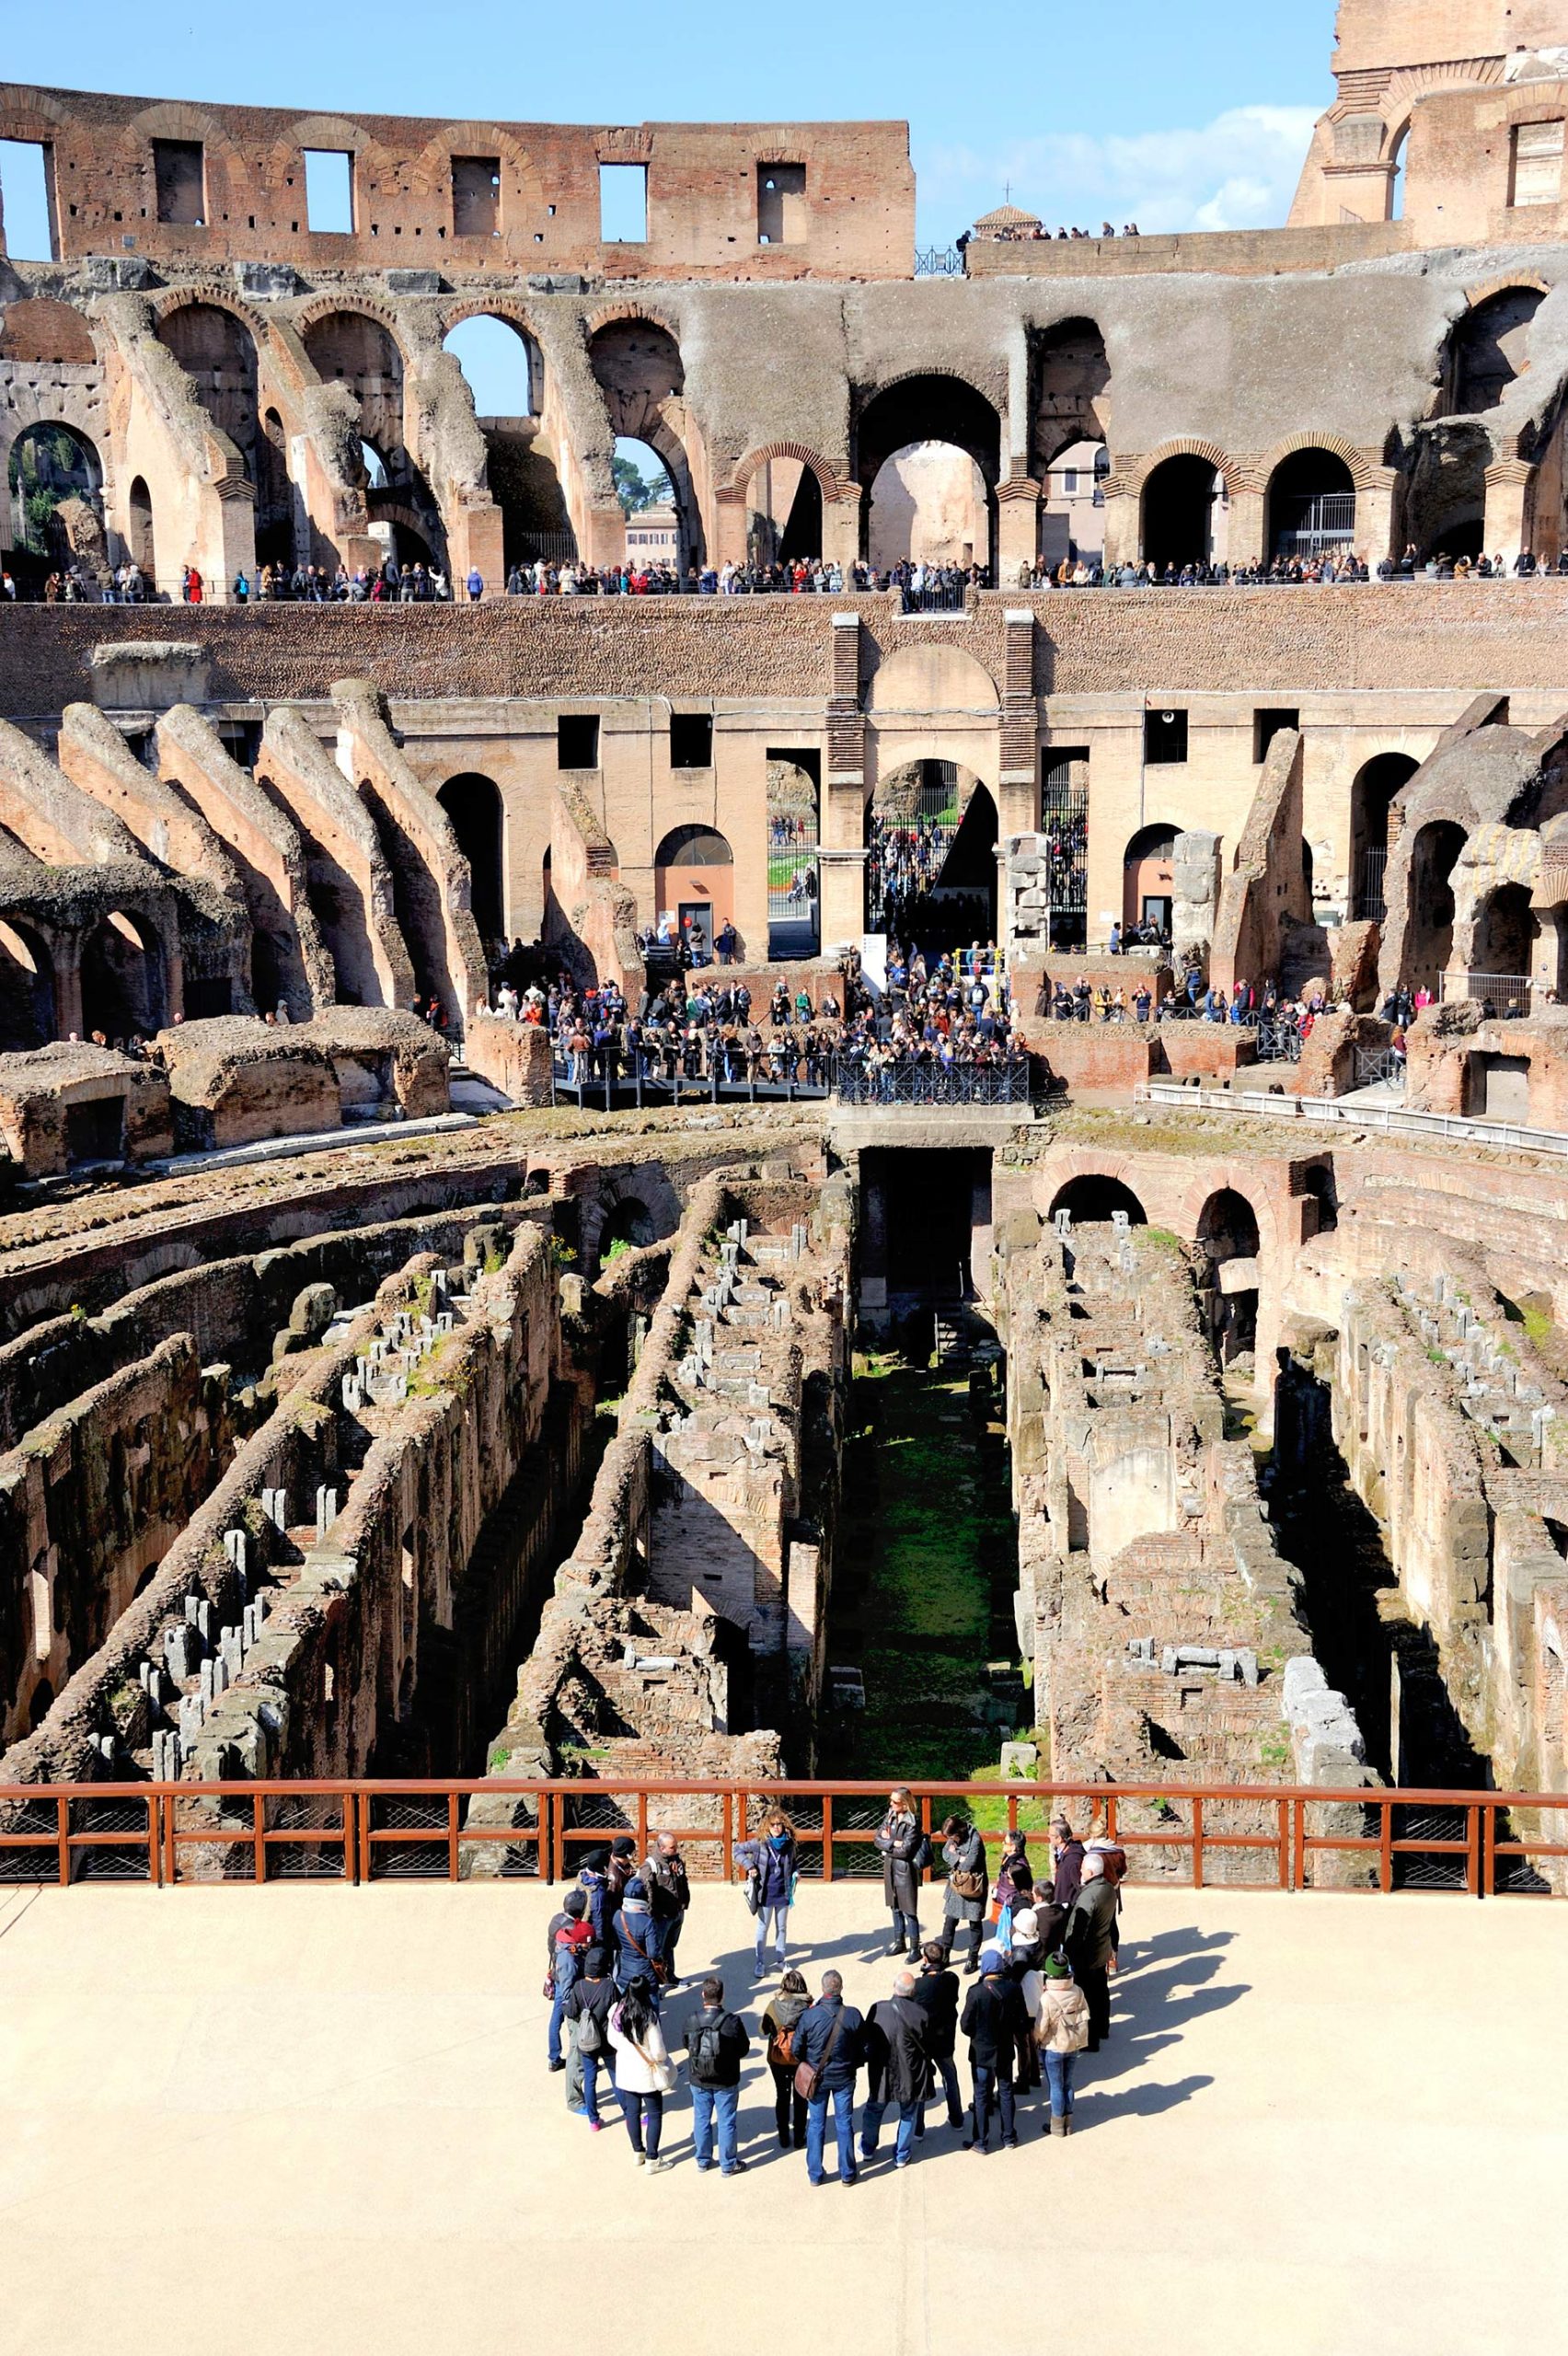 Tourists Inside the Colosseum - Rome, Italy